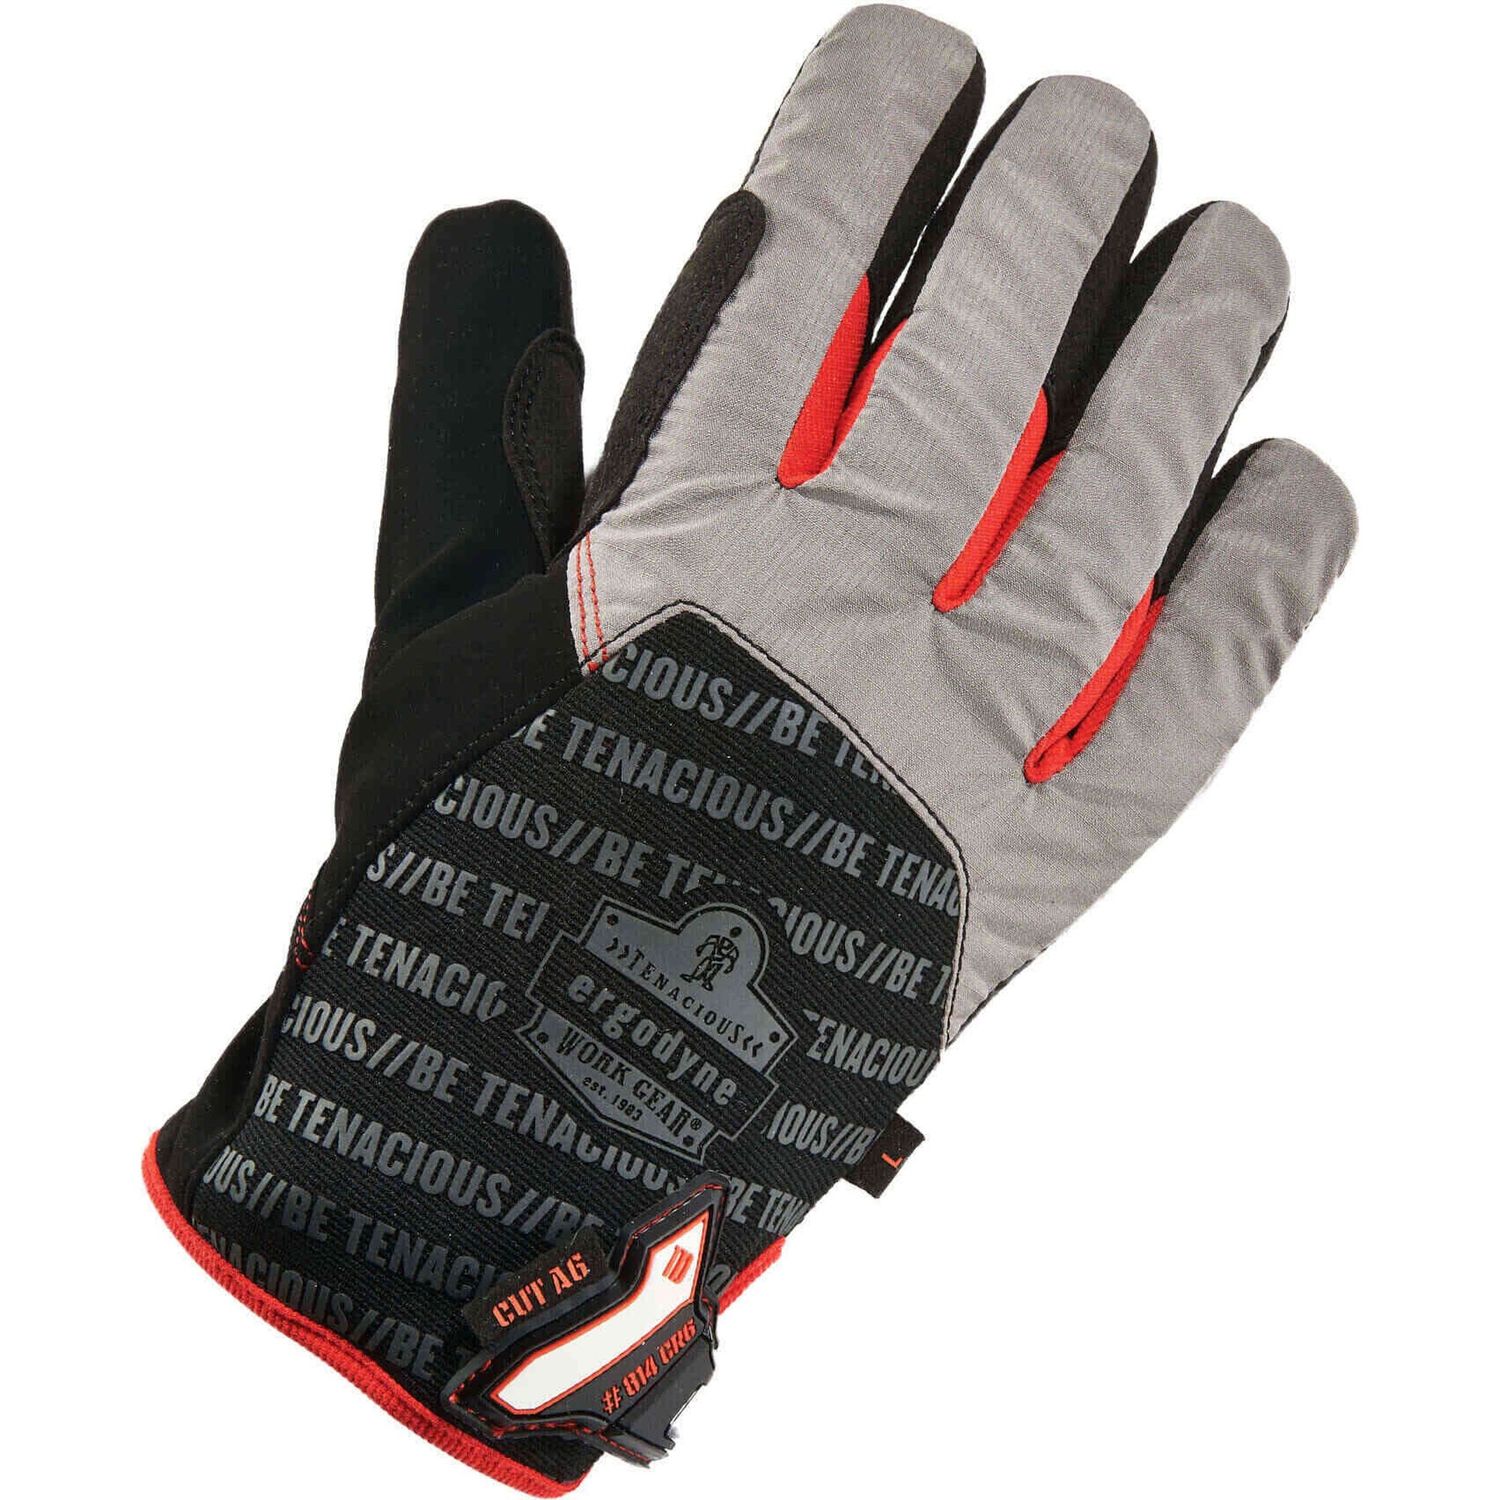 814CR6 Thermal Utility Cut-Resistant Gloves, Thermal Protection, Large Size, Synthetic Leather Palm, Black